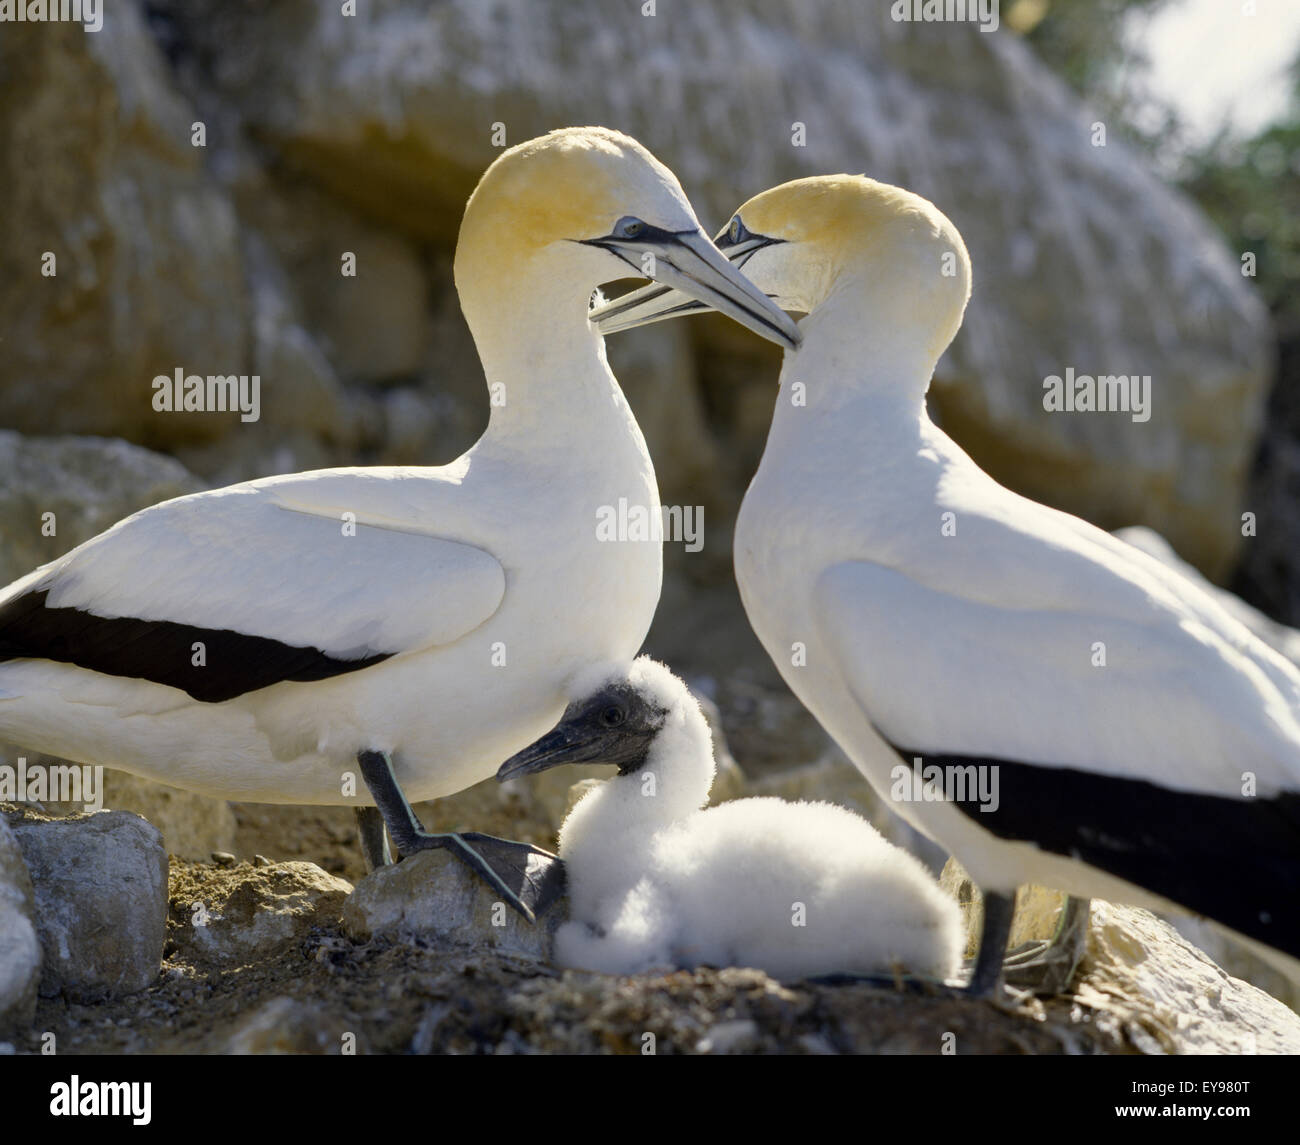 East Coast New Zealand Cape Kidnappers Gannet Family Preening Stock Photo